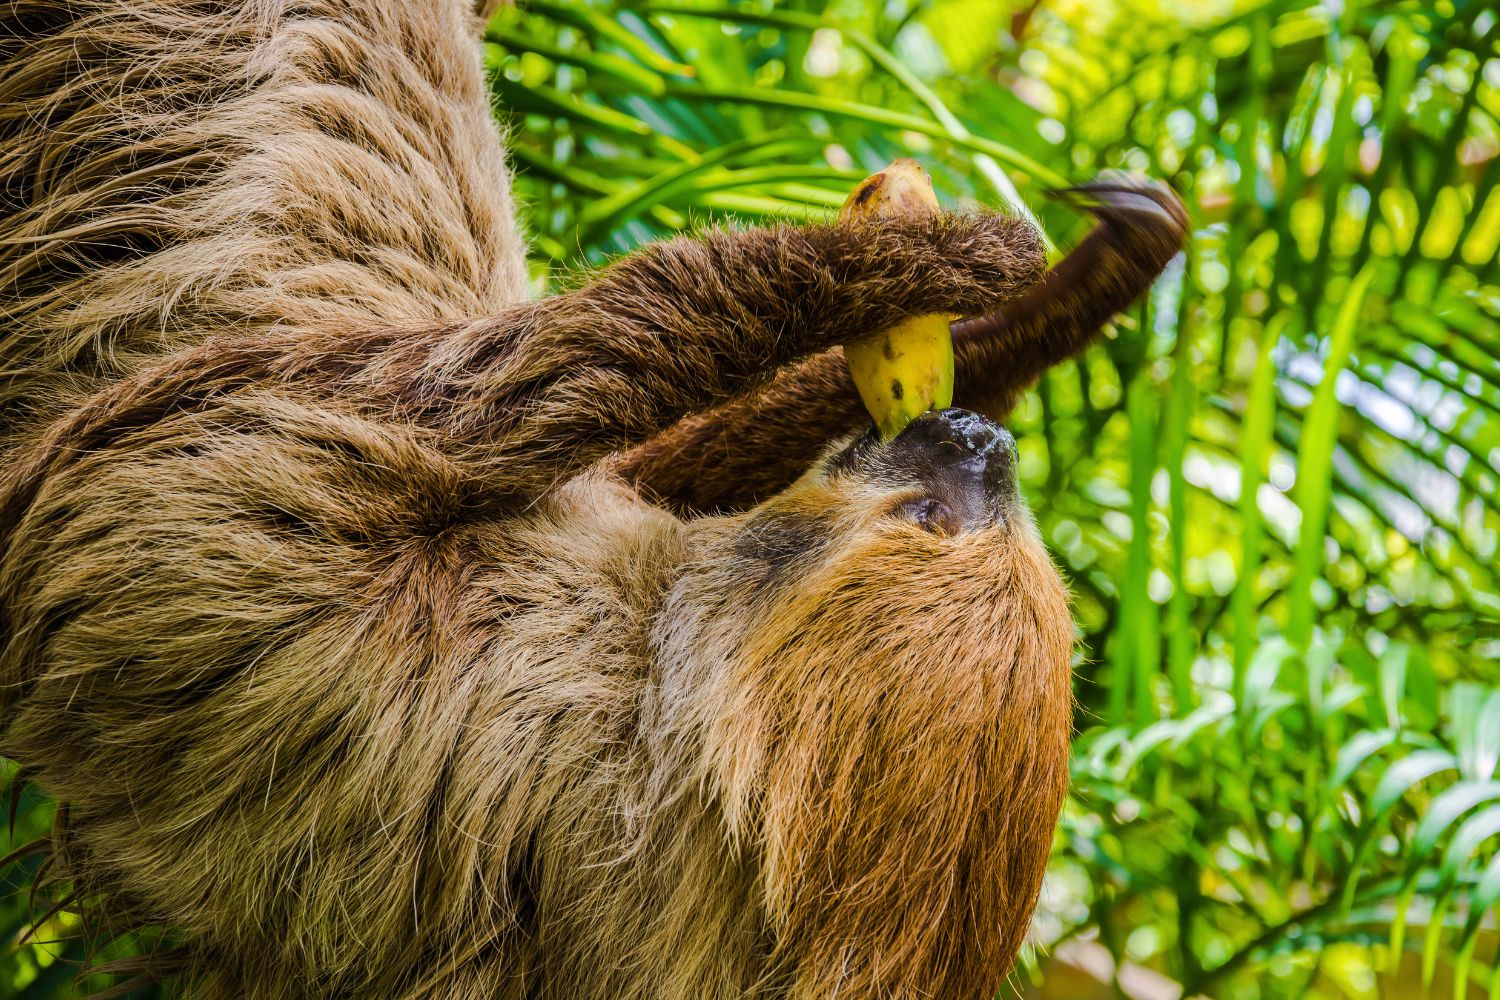 6. Sloths have an incredibly slow metabolism.